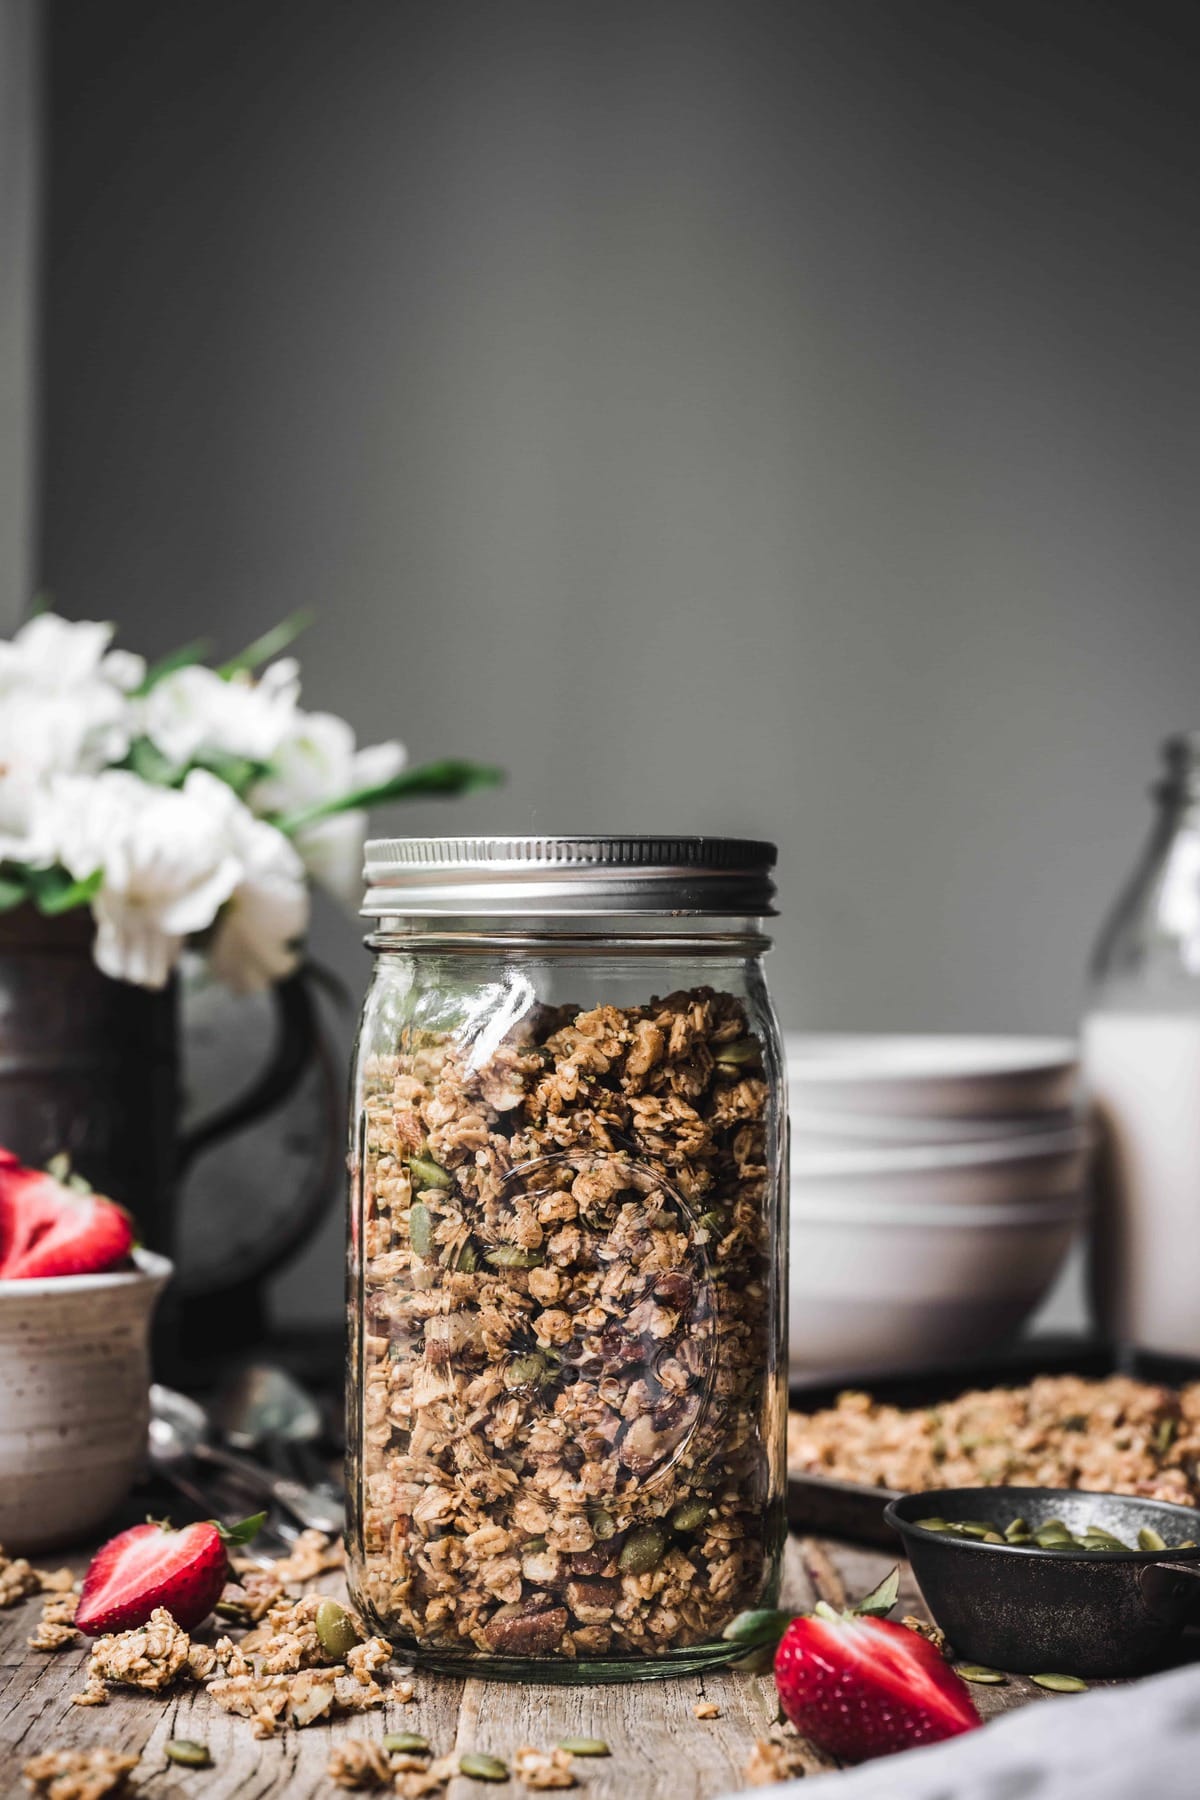 Side view of homemade granola in a glass jar on wood table